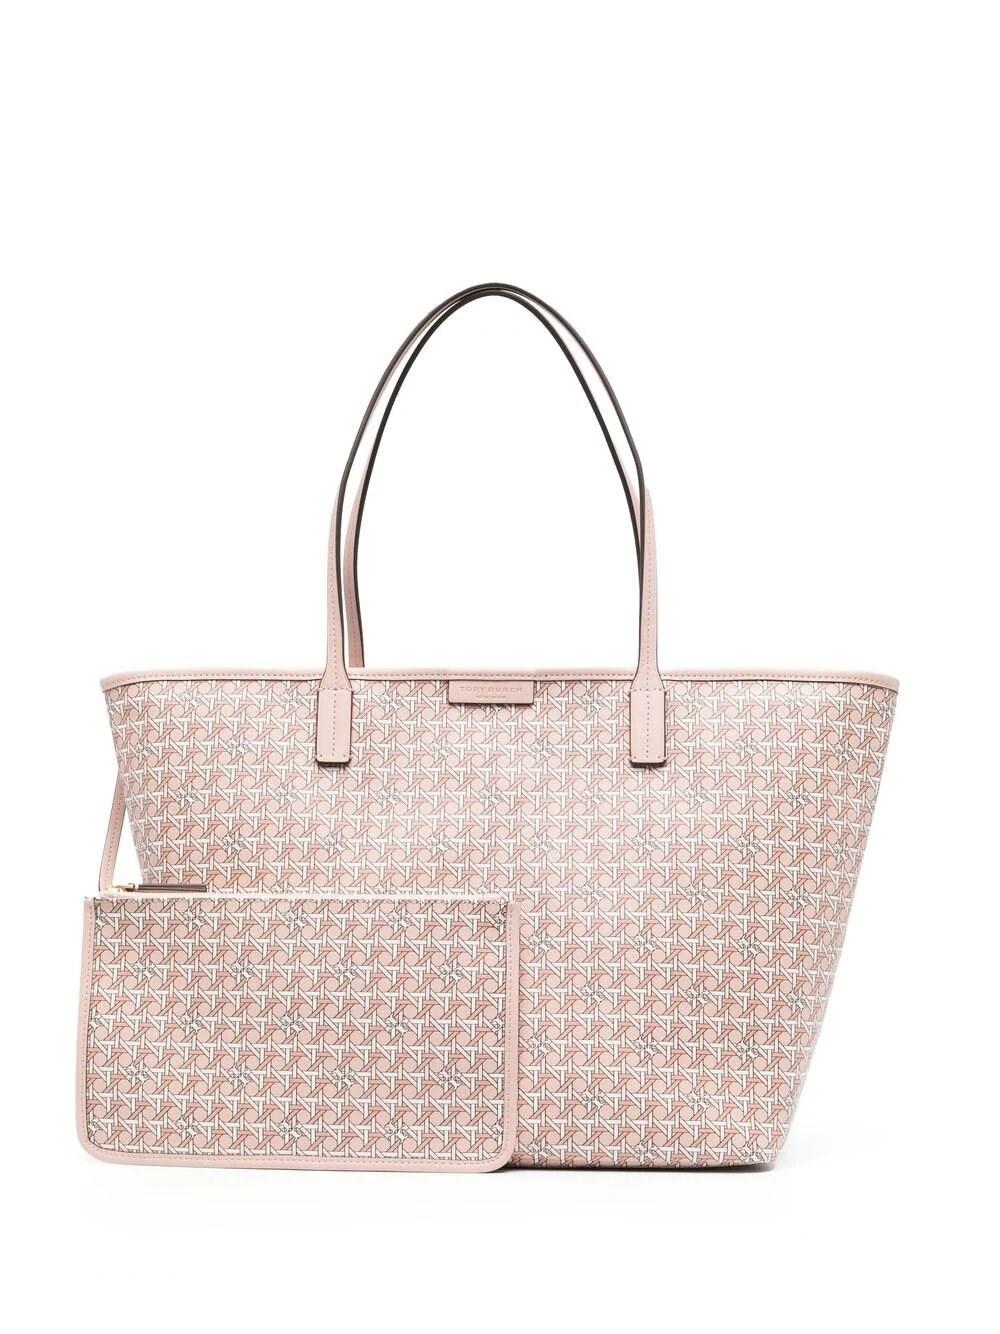 Tory Burch Pink Ever-ready Zip Tote Bag - Women's - Canvas/artificial  Leather | Lyst